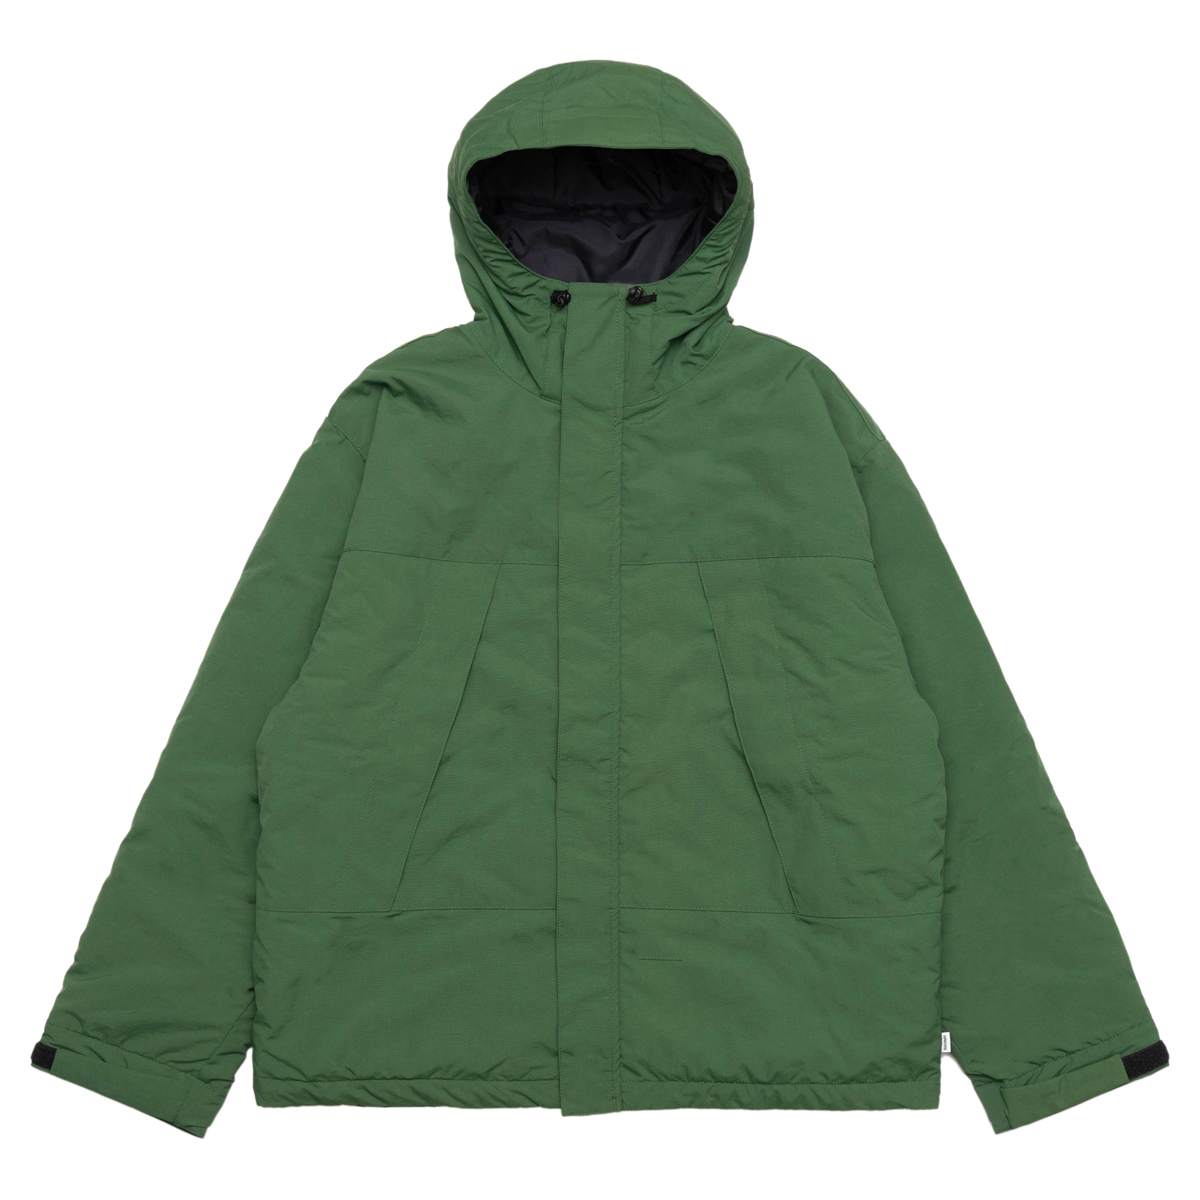 CUP AND CONE NYLON JACKET